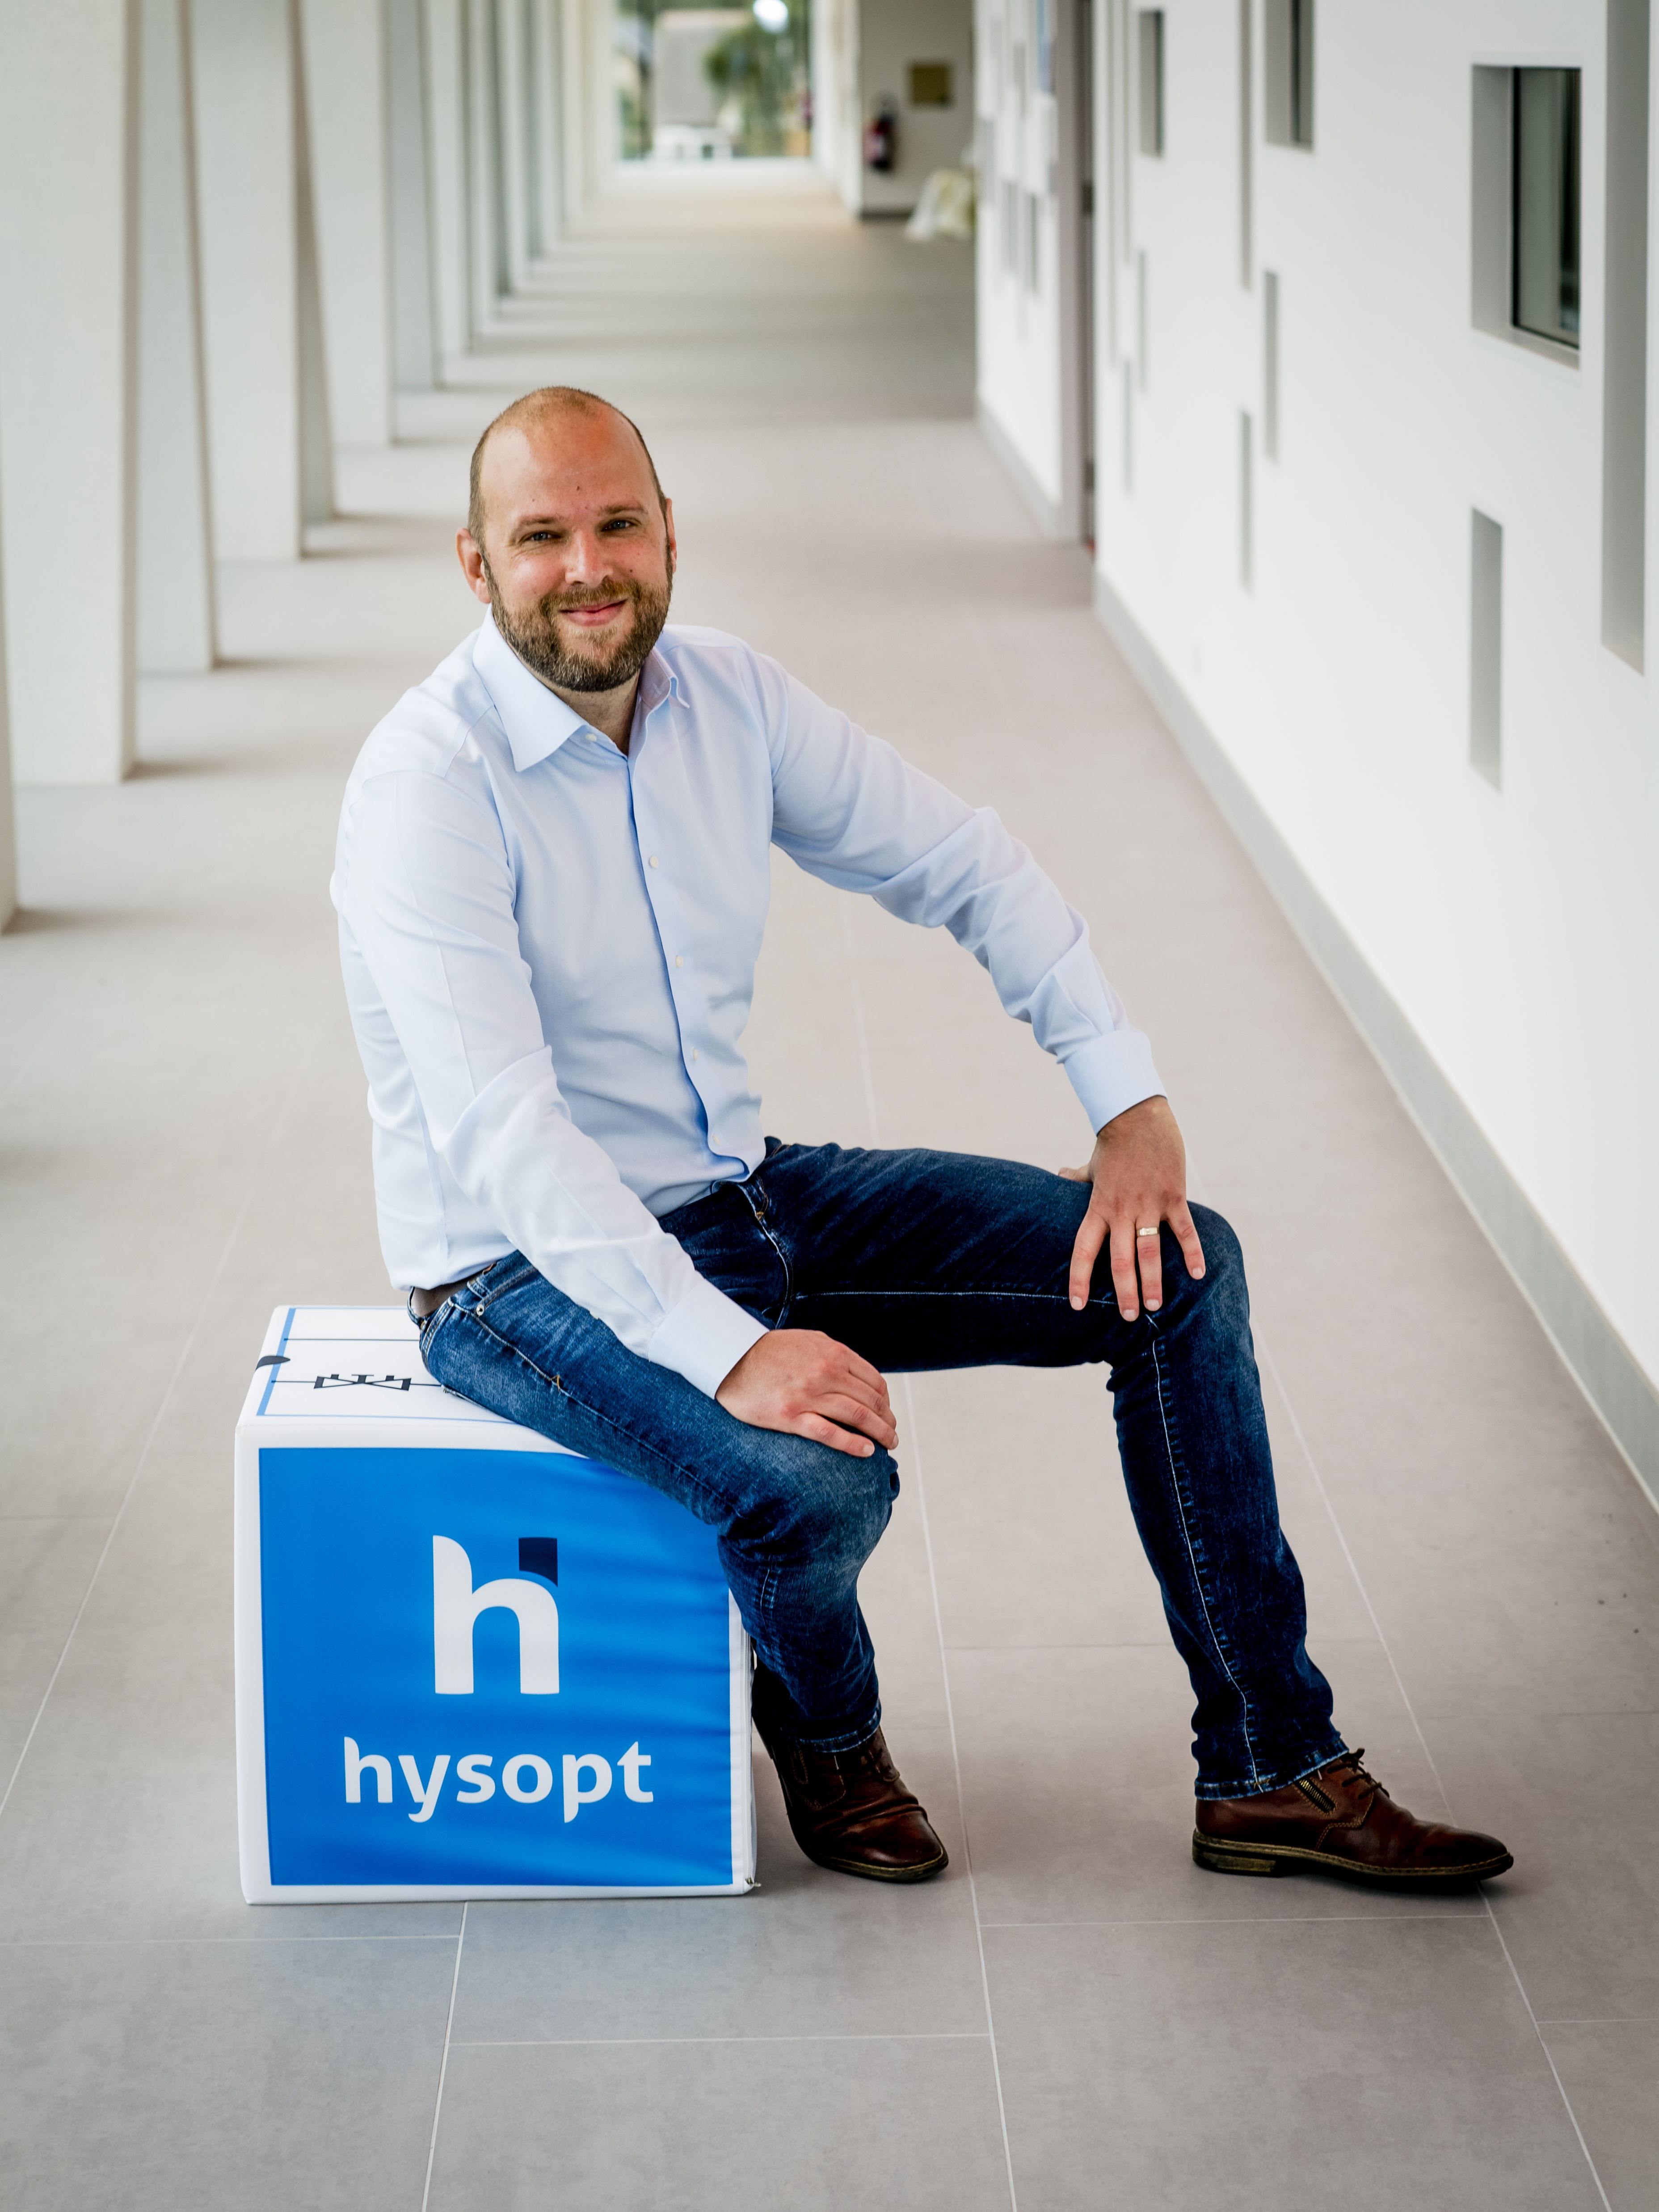 Hysopt, the Belgian pioneer and global technology leader in HVAC optimisation, will be officially launching its Hysopt BIM syncer© during a free webinar on Thursday 29 June.